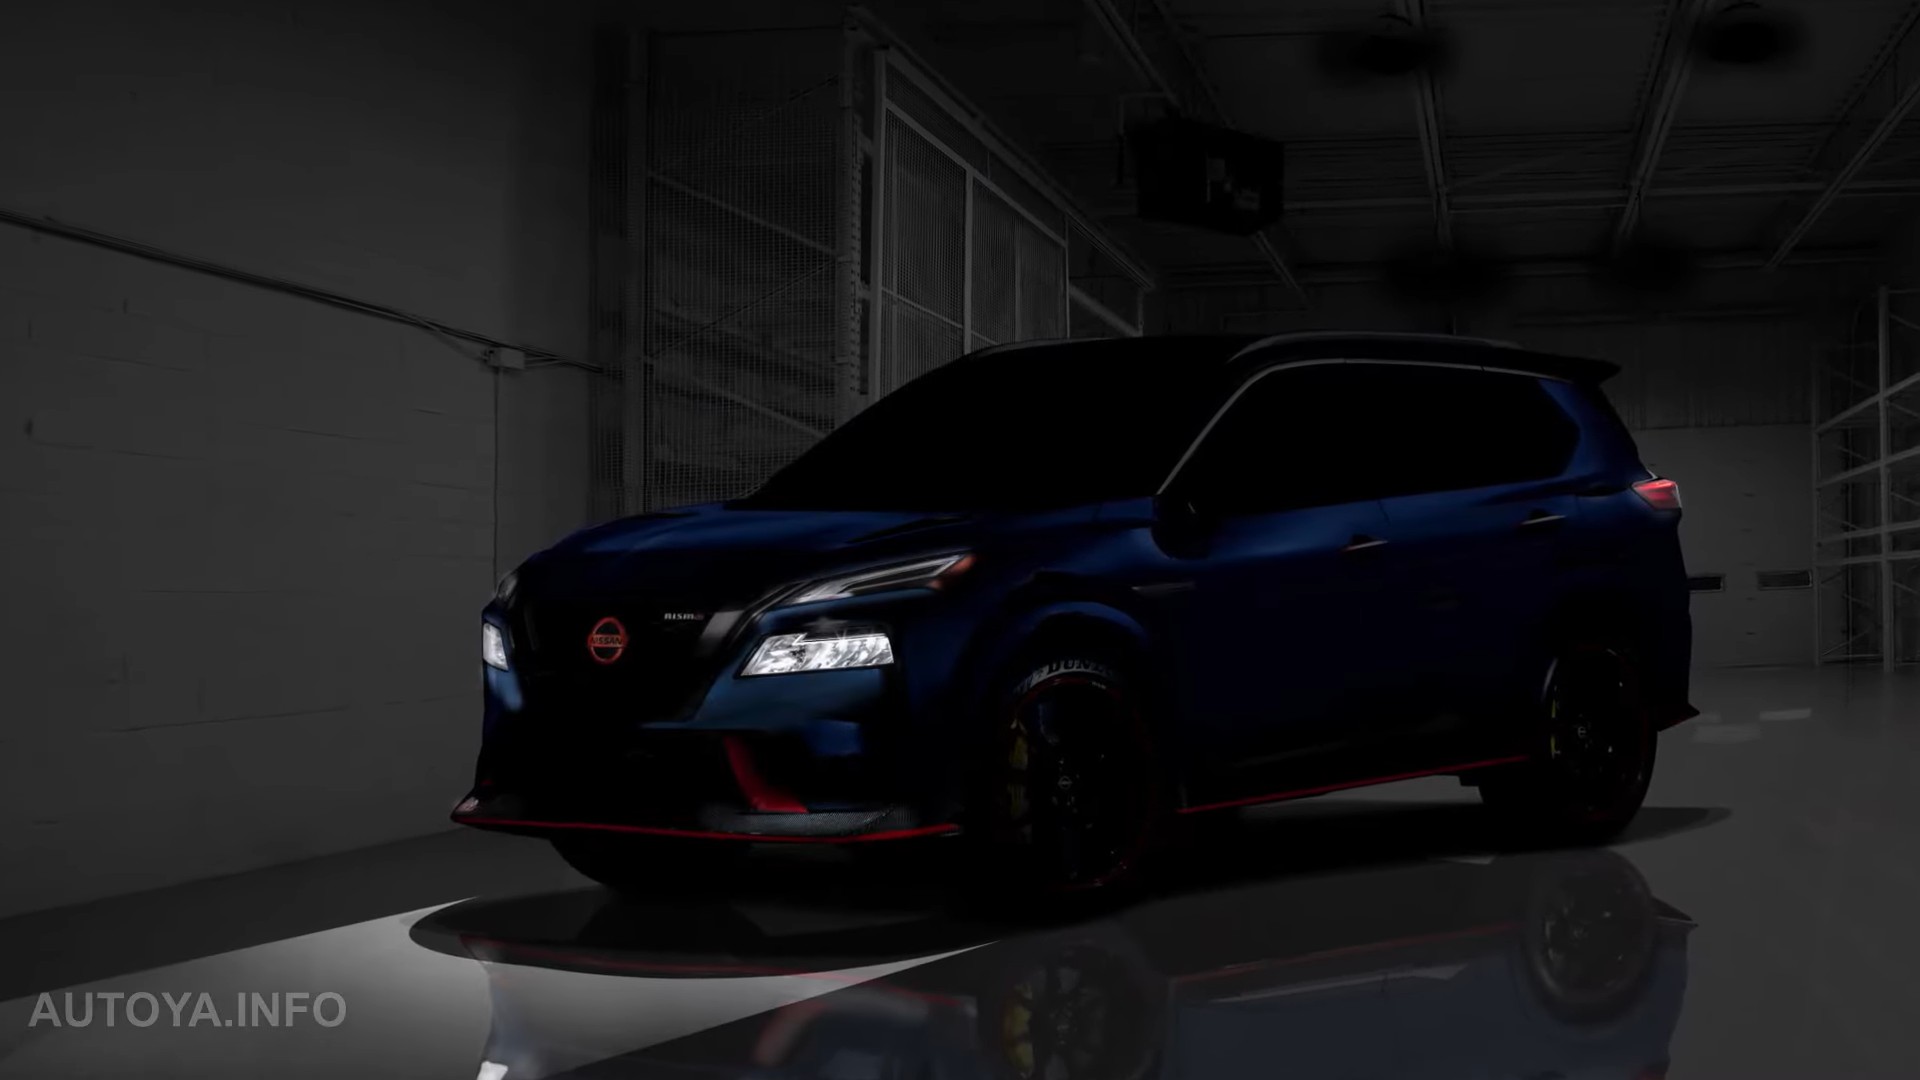 2024 Nissan Rogue Nismo Unofficially Imagined as Powerful and Feisty V6